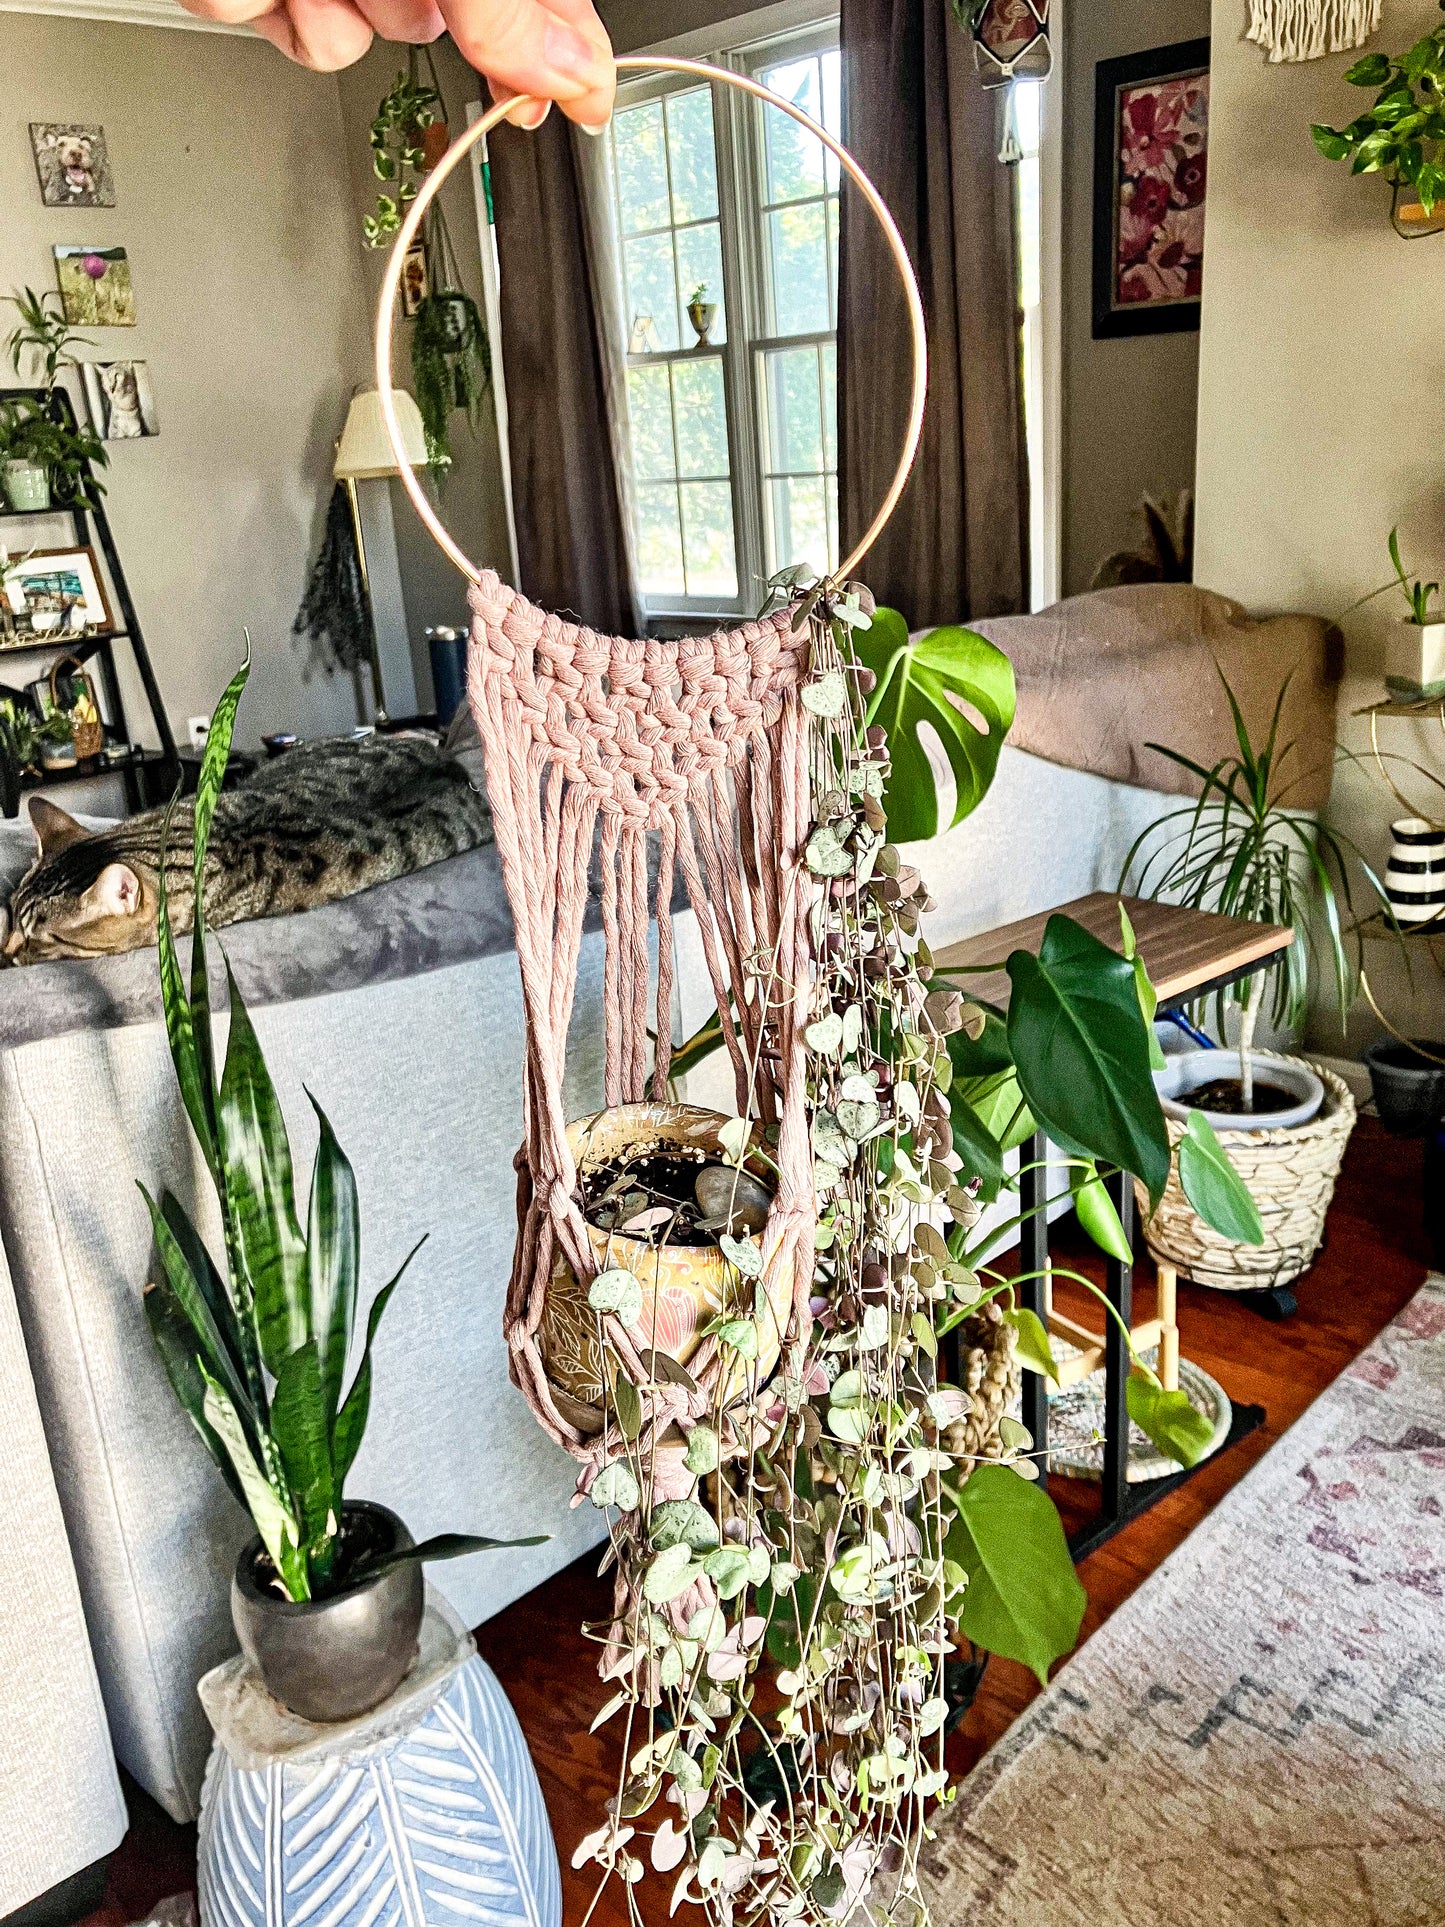 Macrame Plant Hanger Class at The Meadow